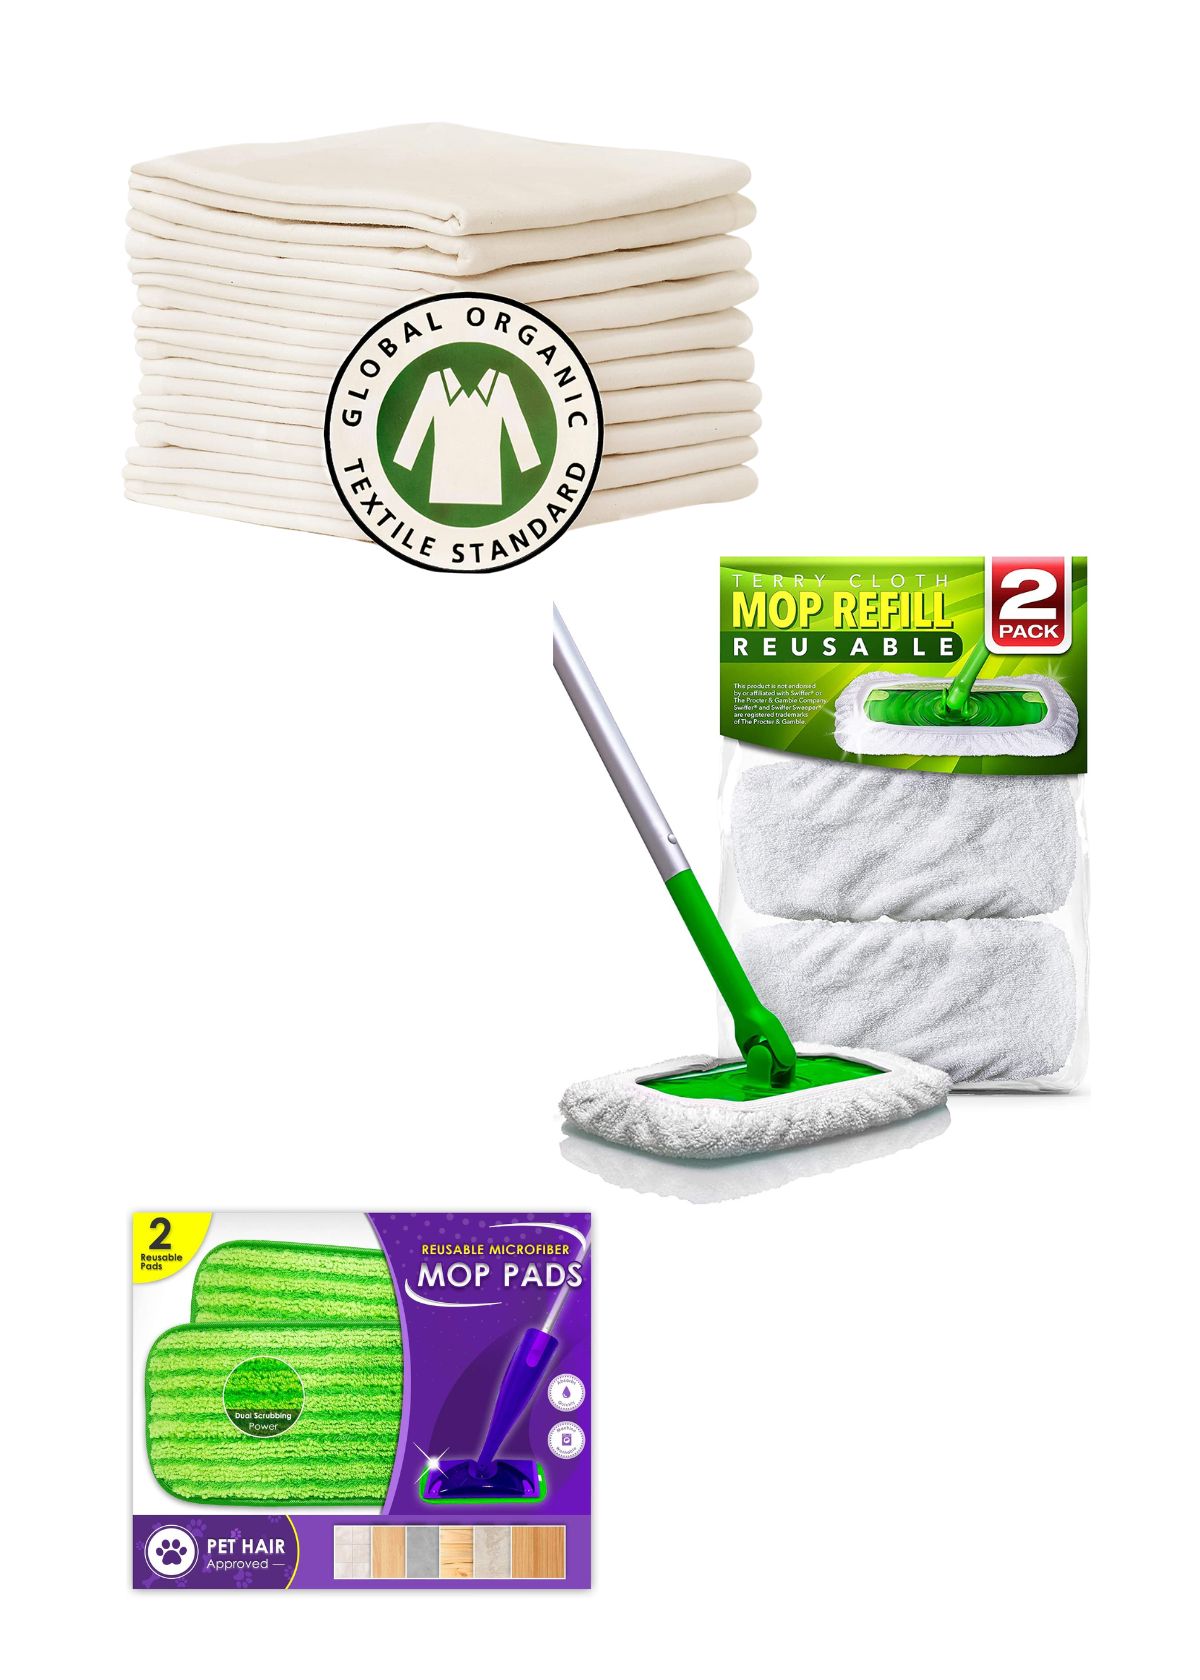 Best Reusable Mop Pads for Swiffer